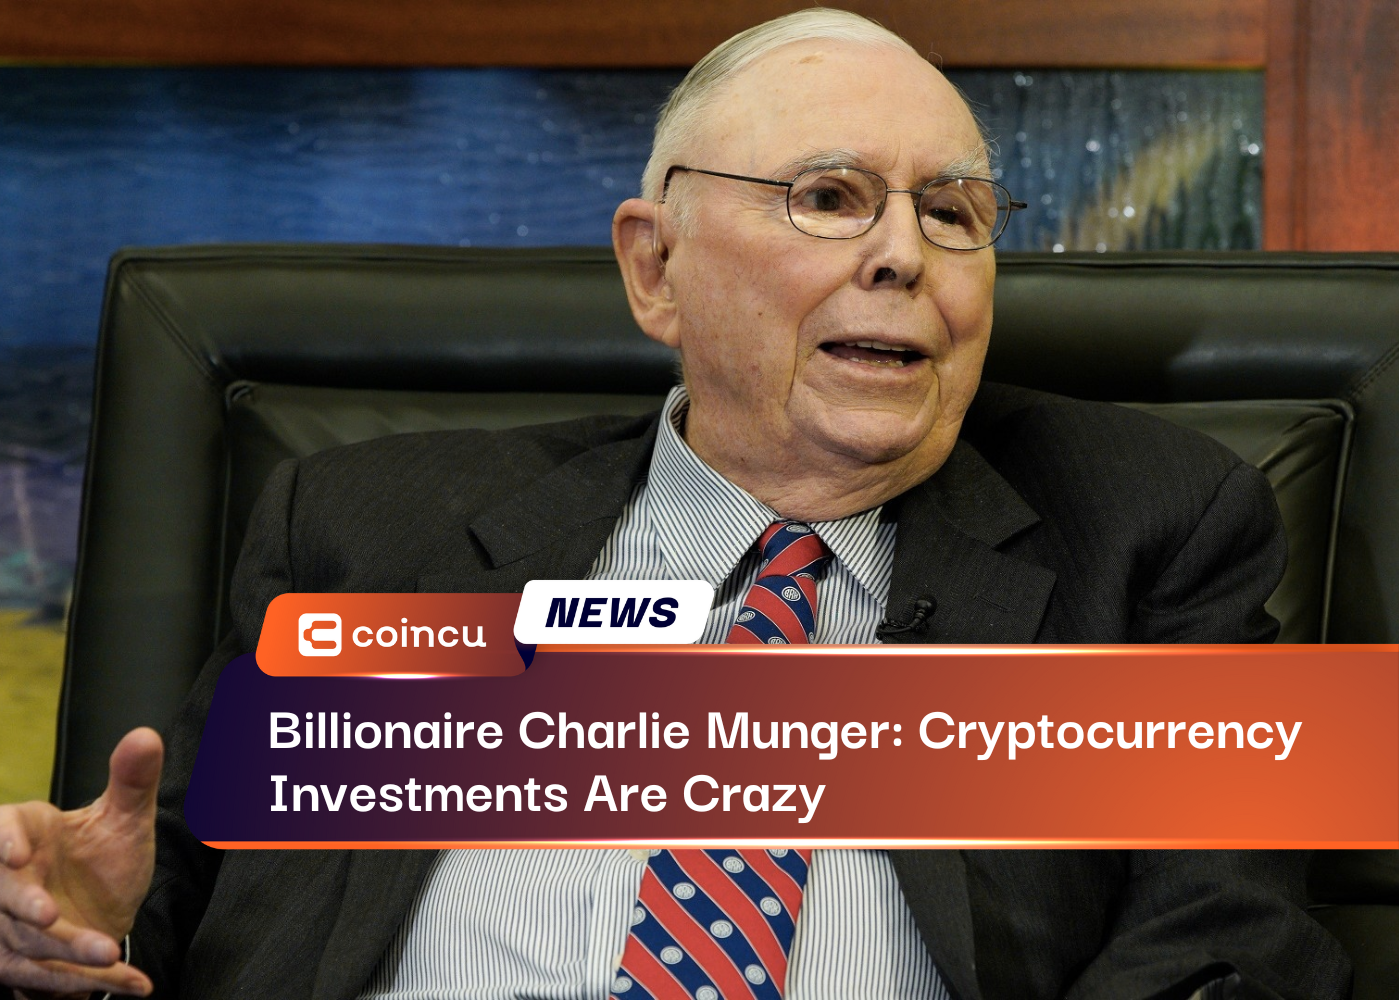 Billionaire Charlie Munger: Cryptocurrency Investments Are Crazy